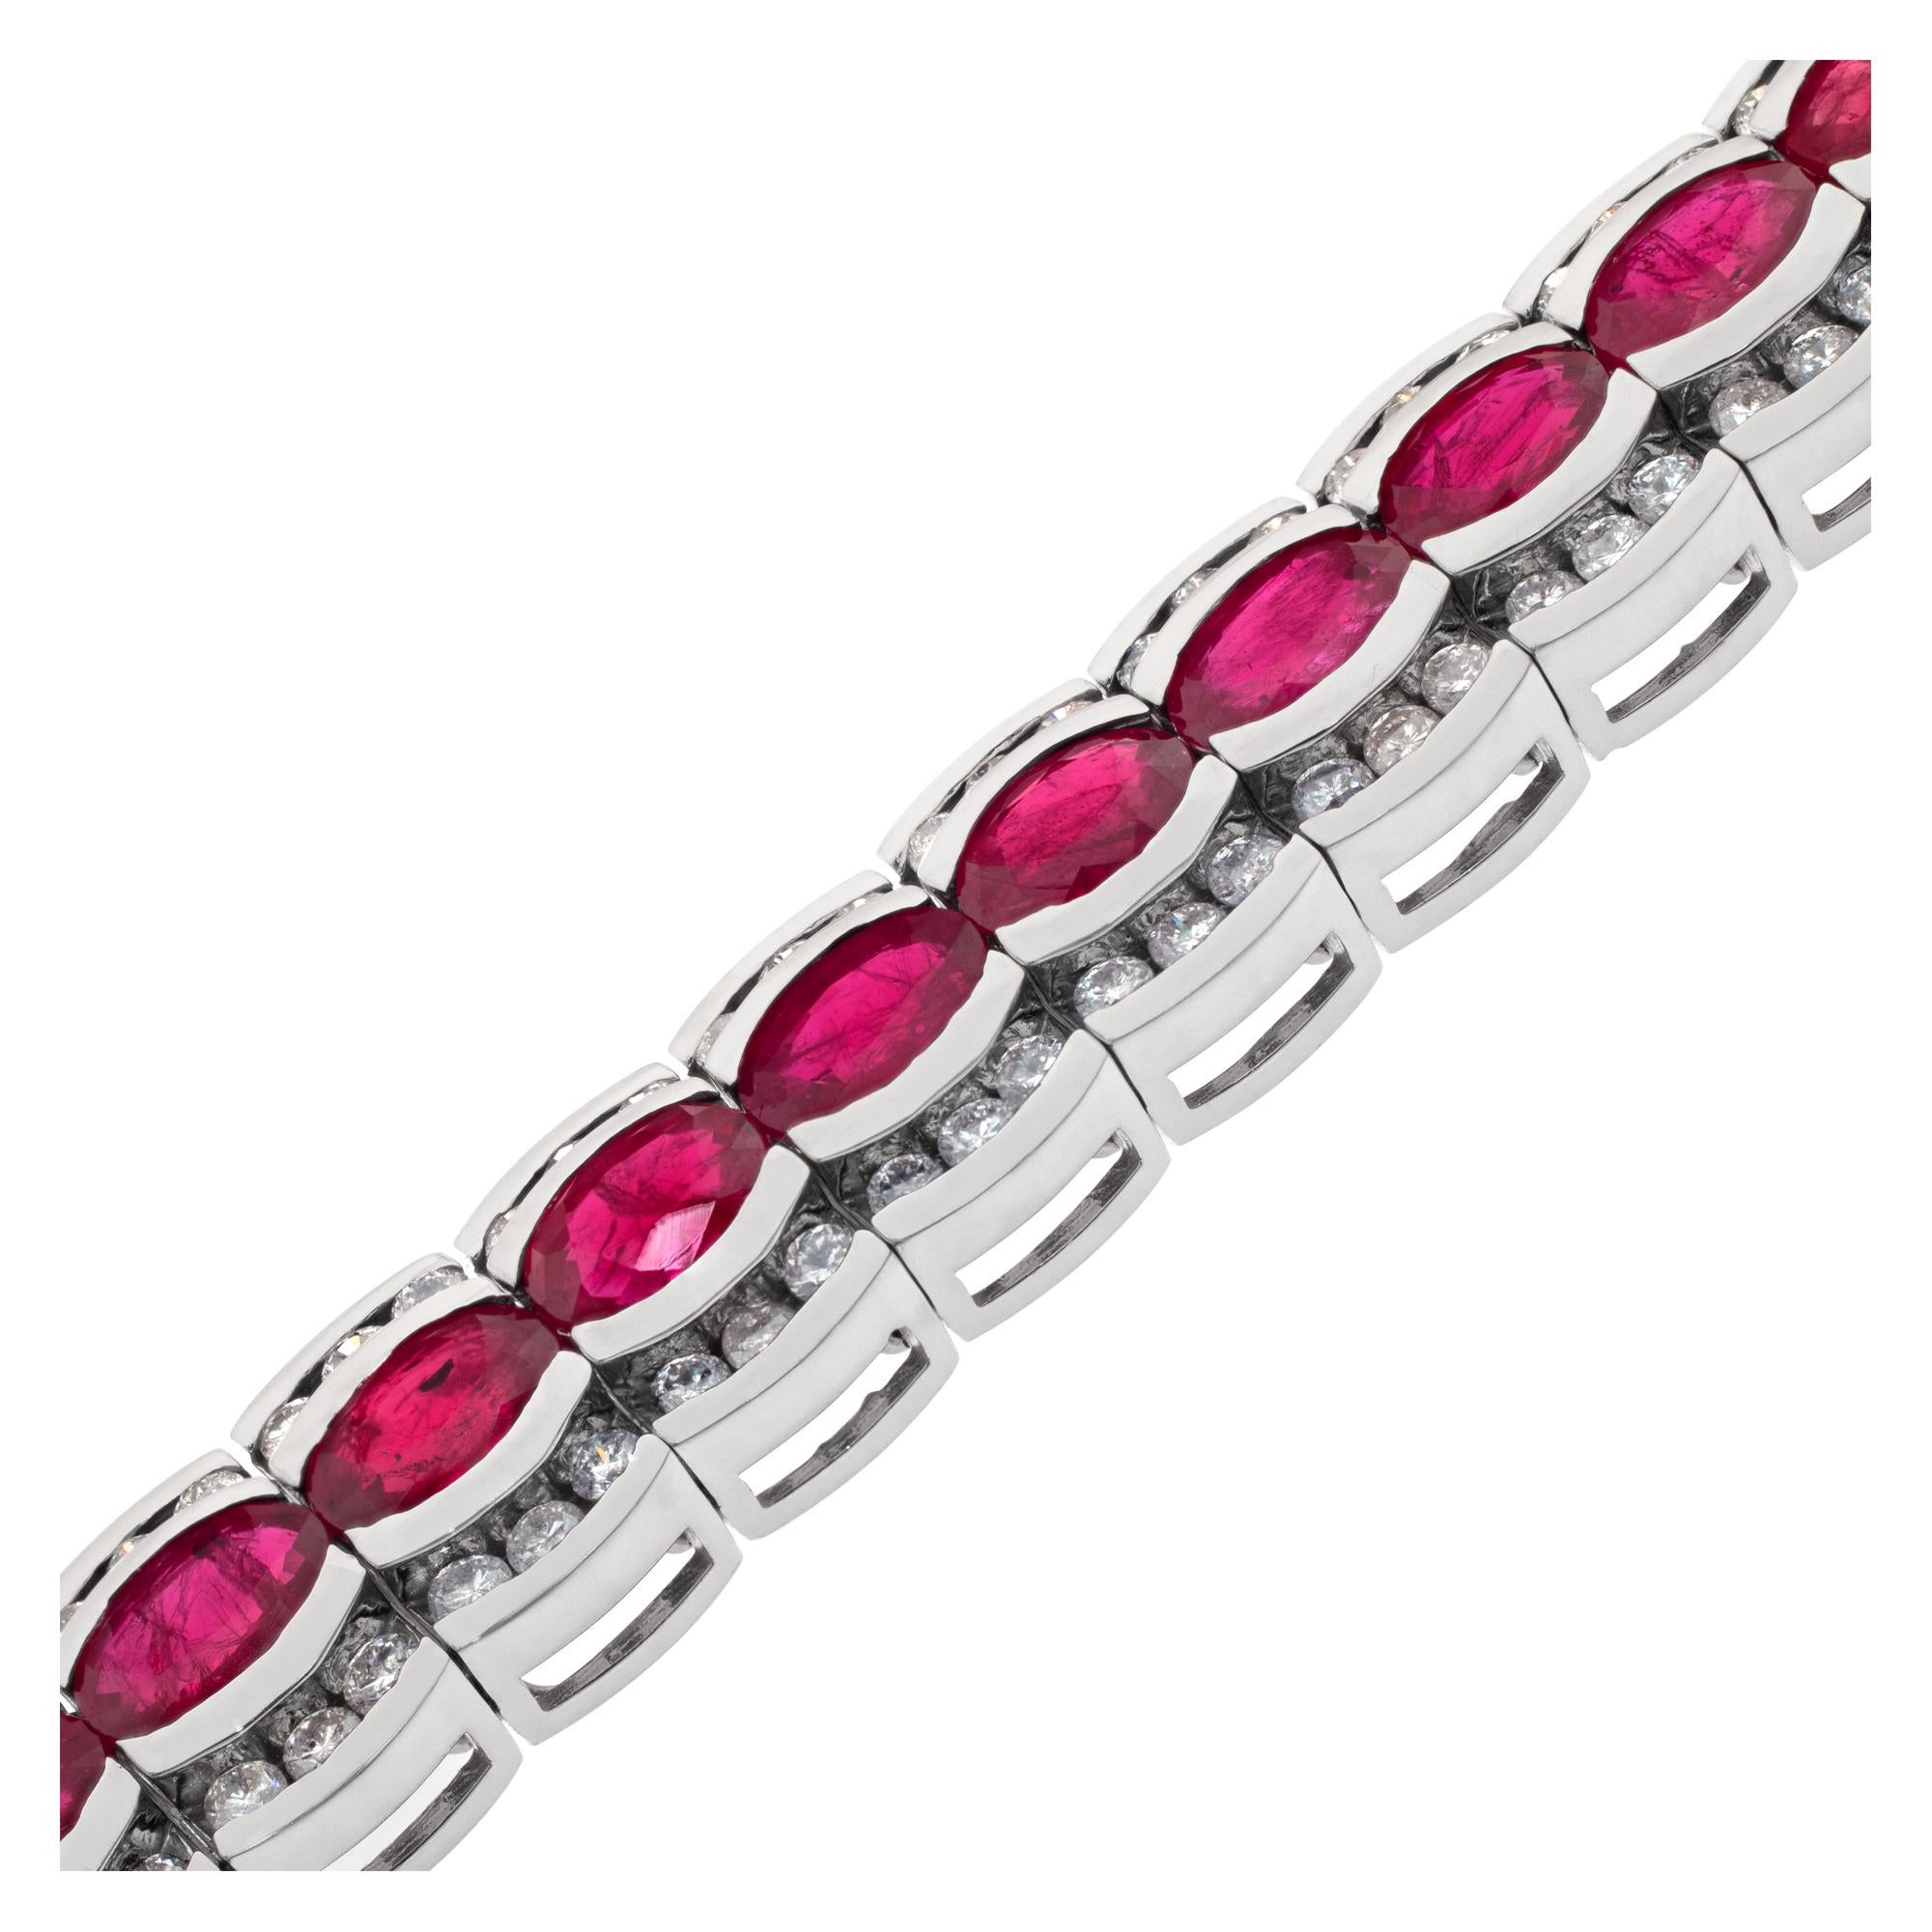 Ruby and diamond line bracelet in 14k white gold. round brilliant cut diamonds total approx. weight: 4 carats, estimate: G-H color, VS-SI clarity. Oval cut rubies total approx. weight: 17.10 carats. Length: 7 inches. Witdth: 10mm.